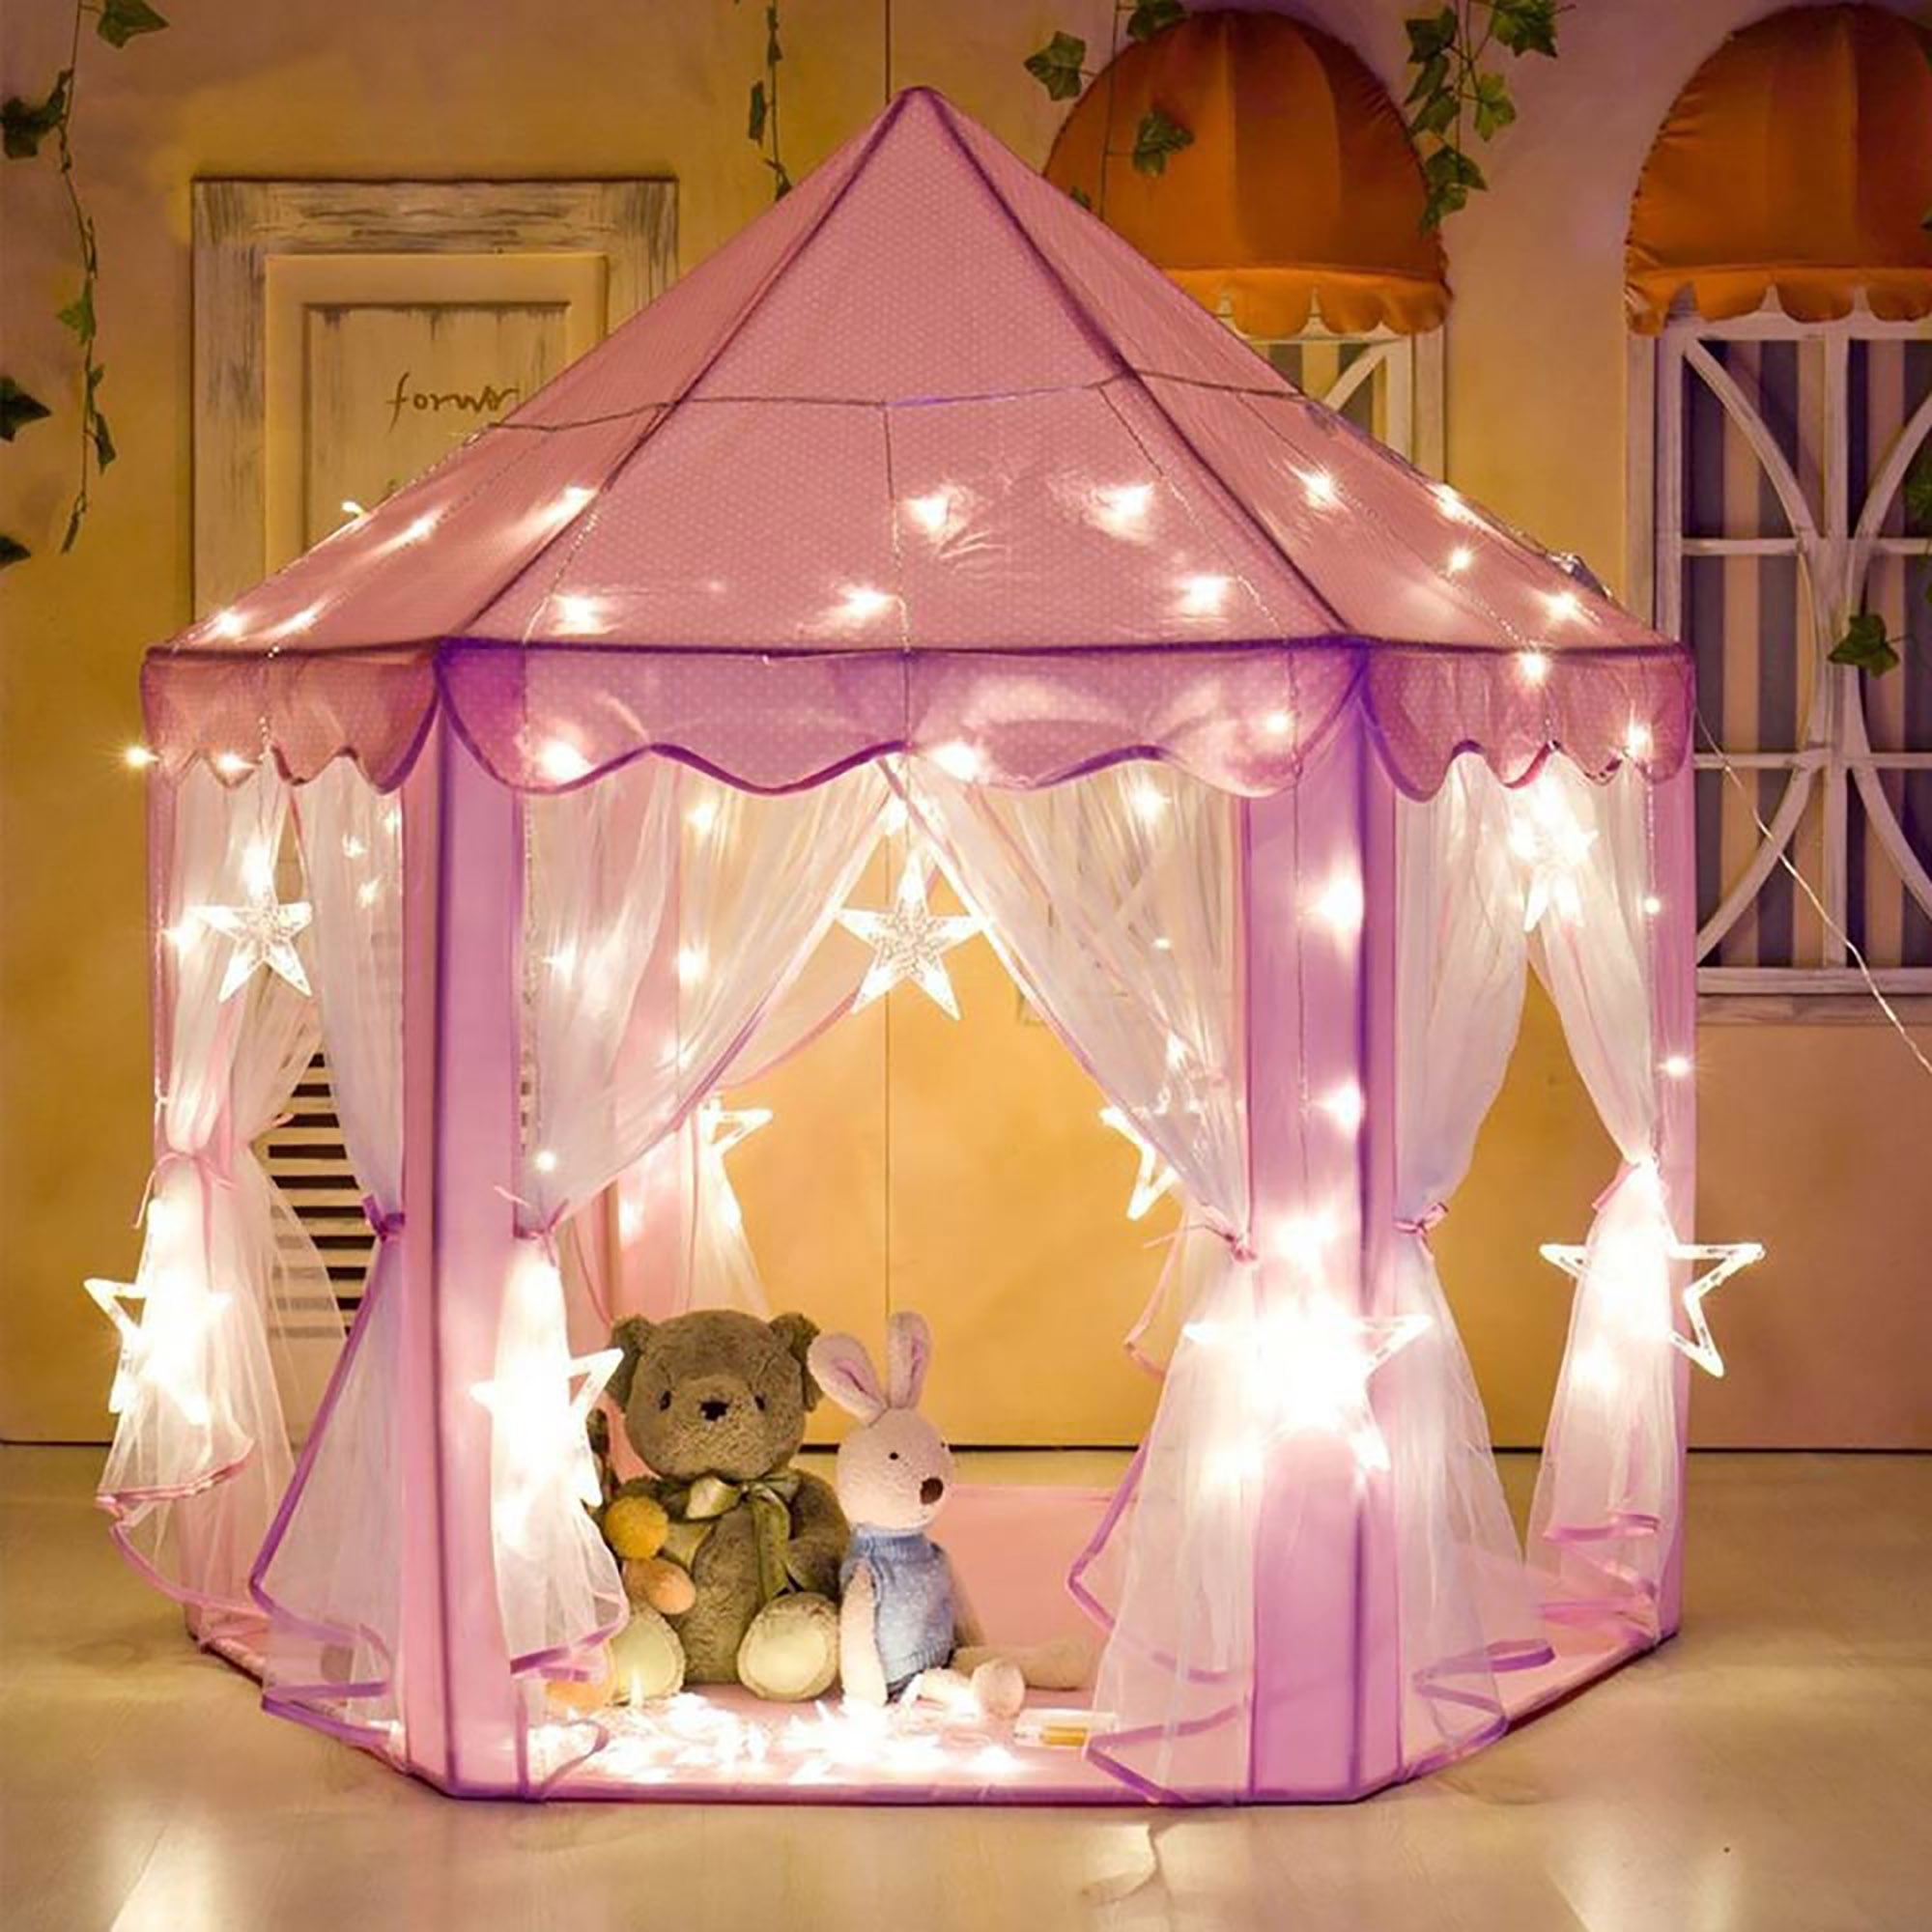 Kids Indoor Princess Castle Play Tents,Sanmersen Outdoor Portable Large Playhouse with LED Star Lights,Perfect Indoor Toys Gift for Child Toddlers Pink